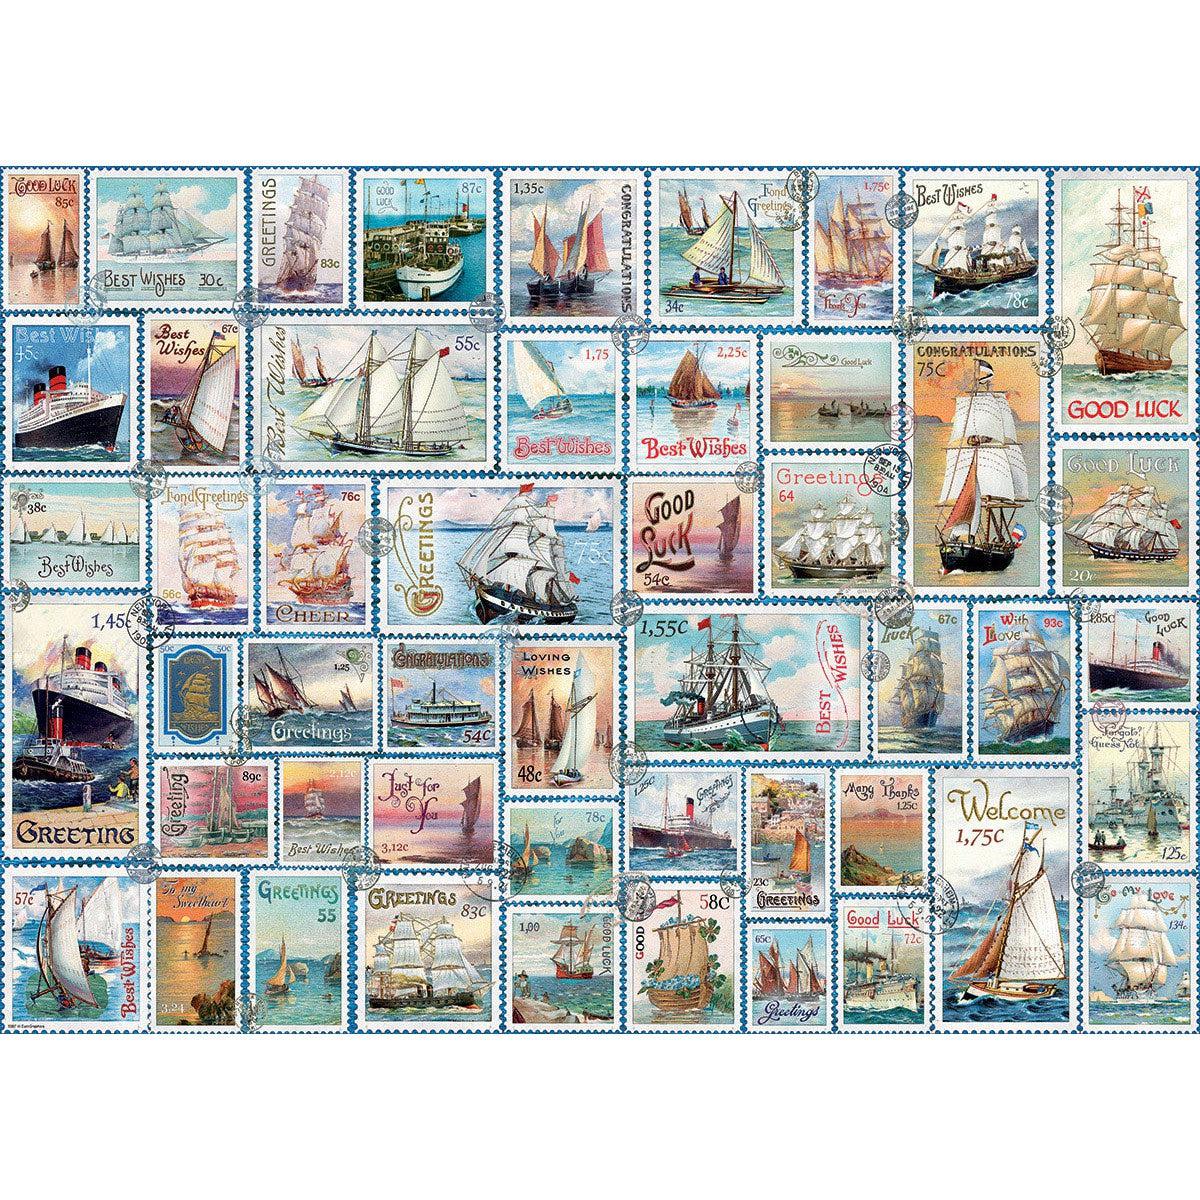 Sailing Ships Vintage Stamps 500 Piece Jigsaw Puzzle Eurographics